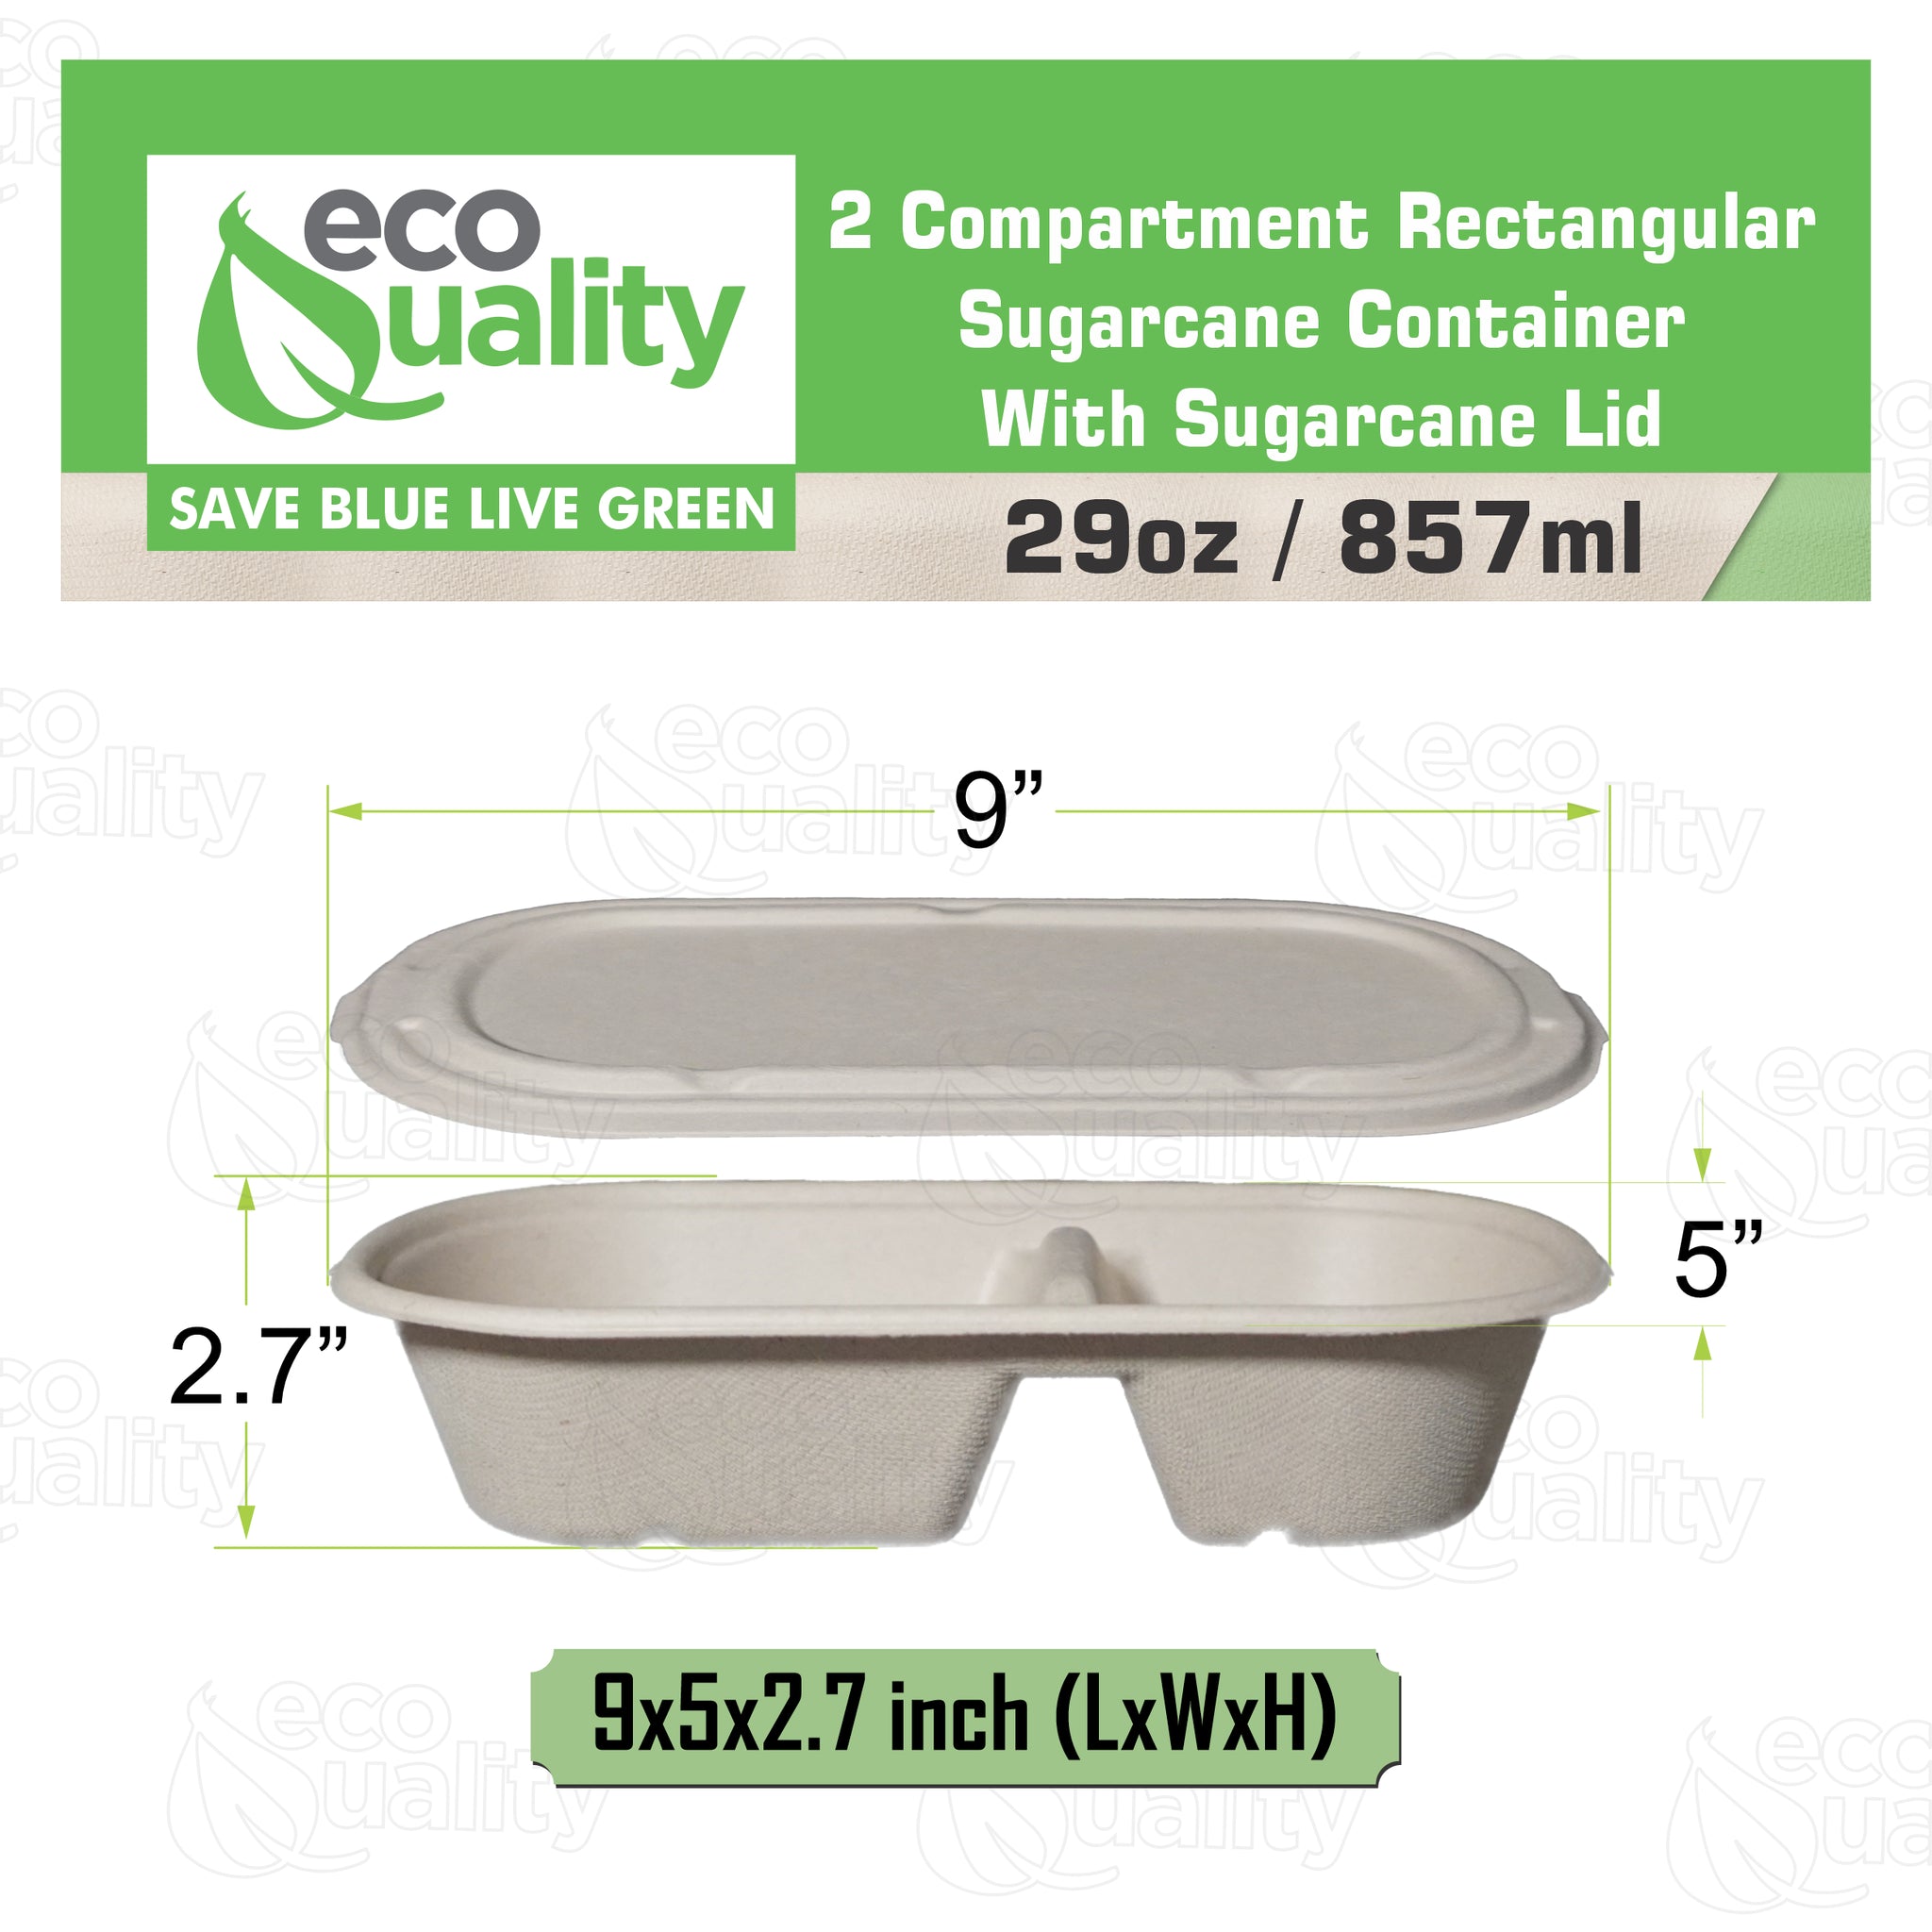 2 Compartment Compostable Containers Household Supplies Disposable 2 Compartment Compostable Containers Bbq disposable 2 Compartment Compostable Containers heavy duty 2 Compartment Compostable Containers classic elegant sturdy reusable wedding dinner 2 Compartment Compostable Containers catering high quality birthday anniversary 2 Compartment Compostable Containers